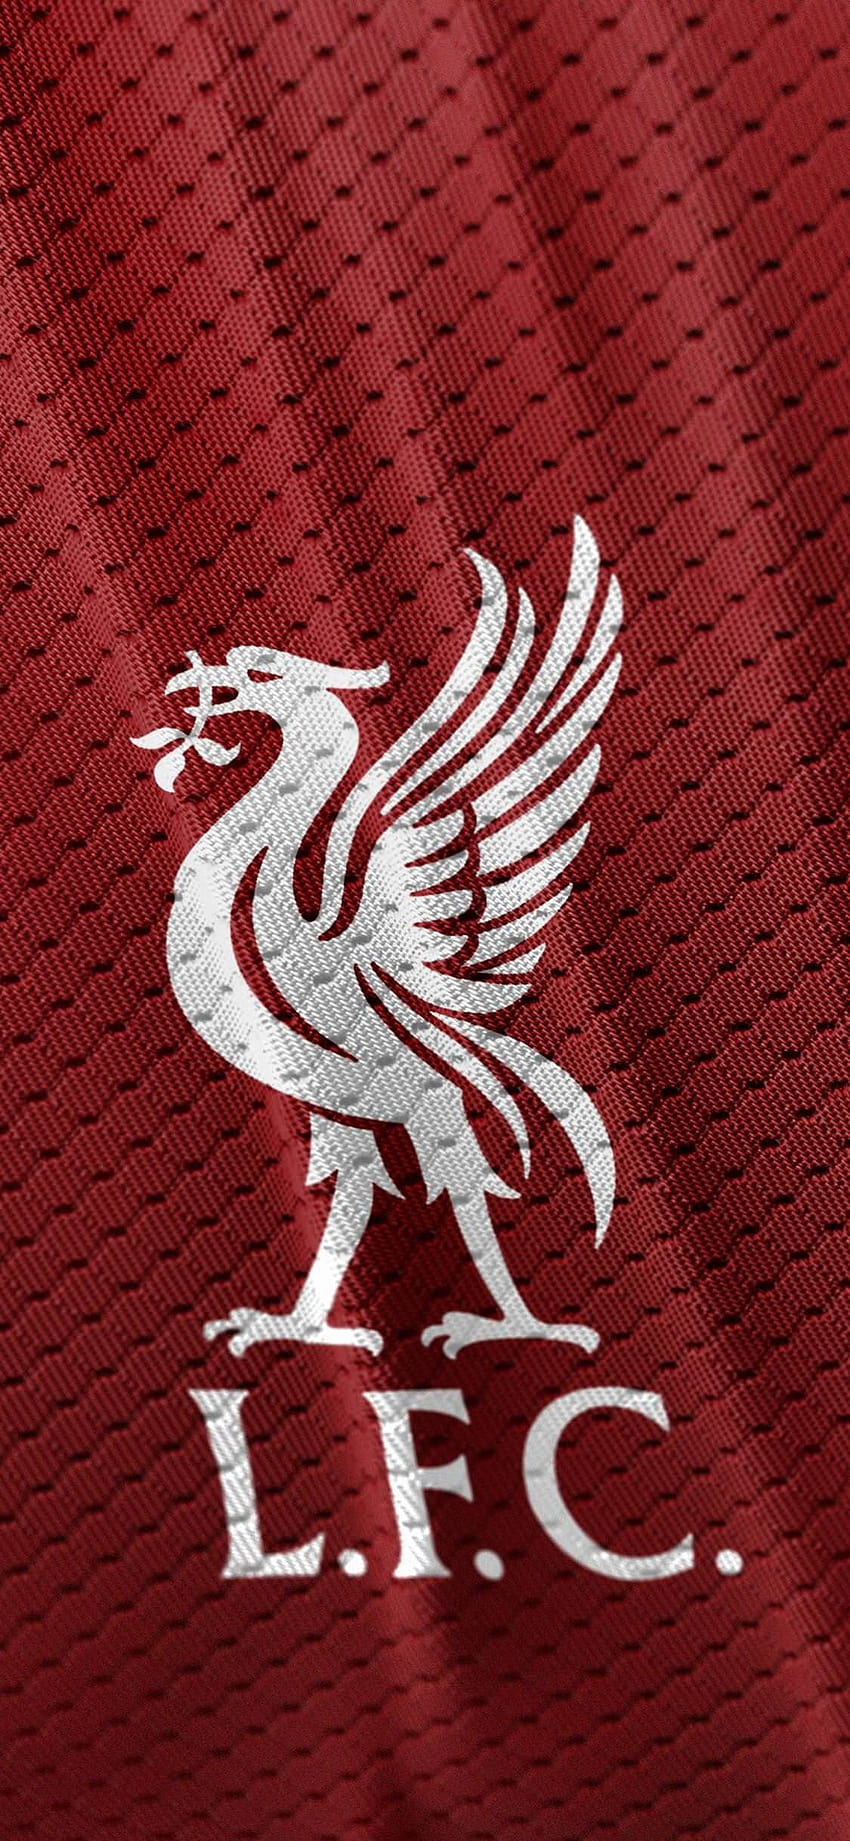 Lets share some Liverpool Theme Phone . : LiverpoolFC, liverpool squad HD phone wallpaper